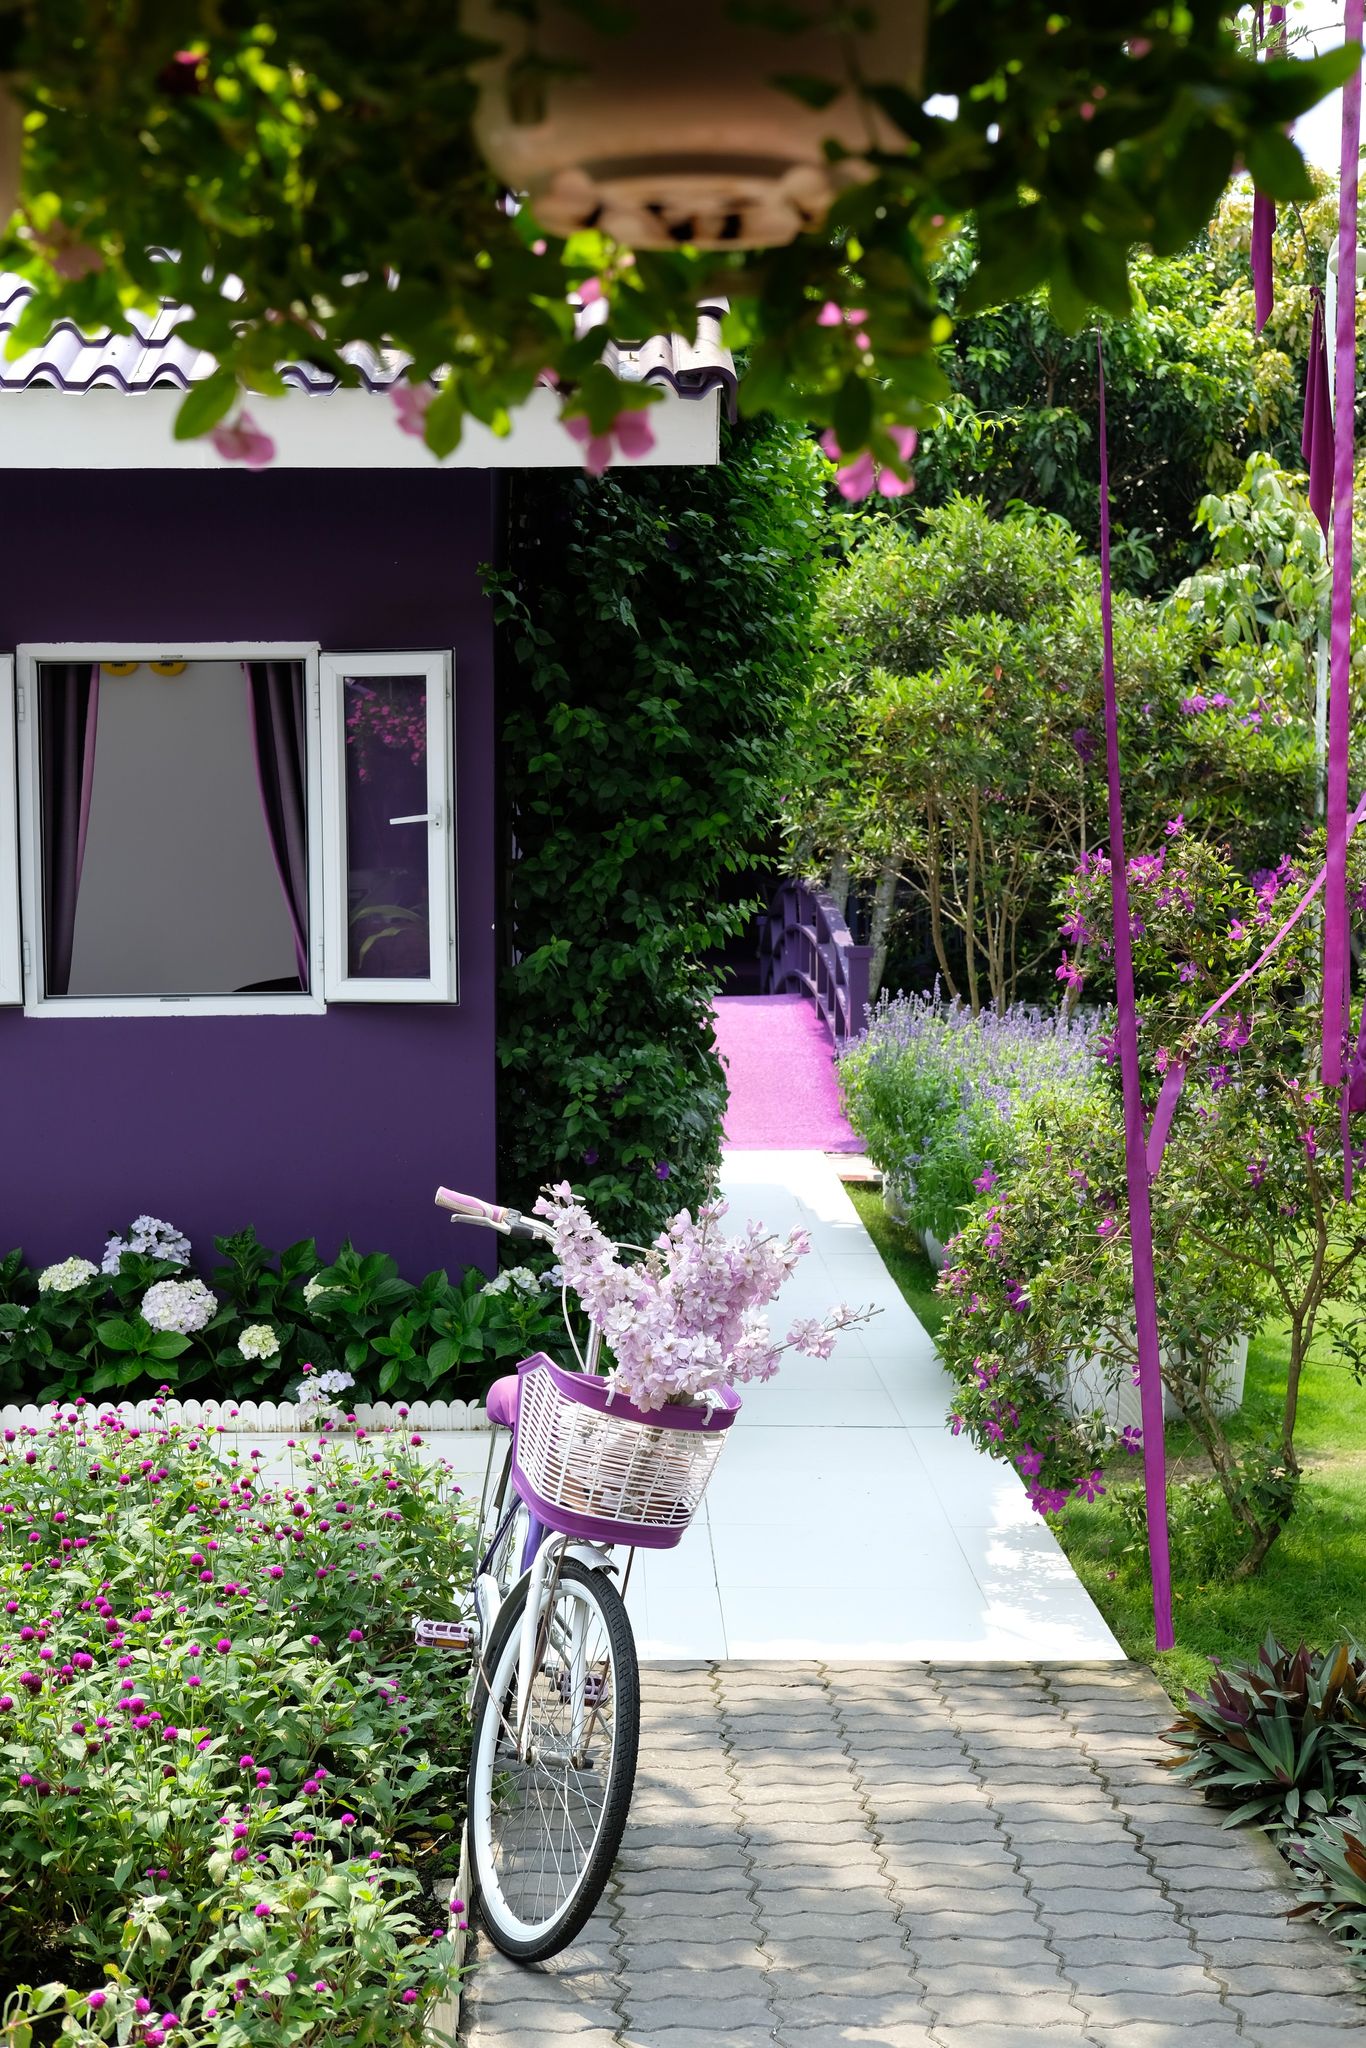 A corner of The Purple House in Can Tho City, Vietnam. Photo: Tran Phuong / Tuoi Tre News